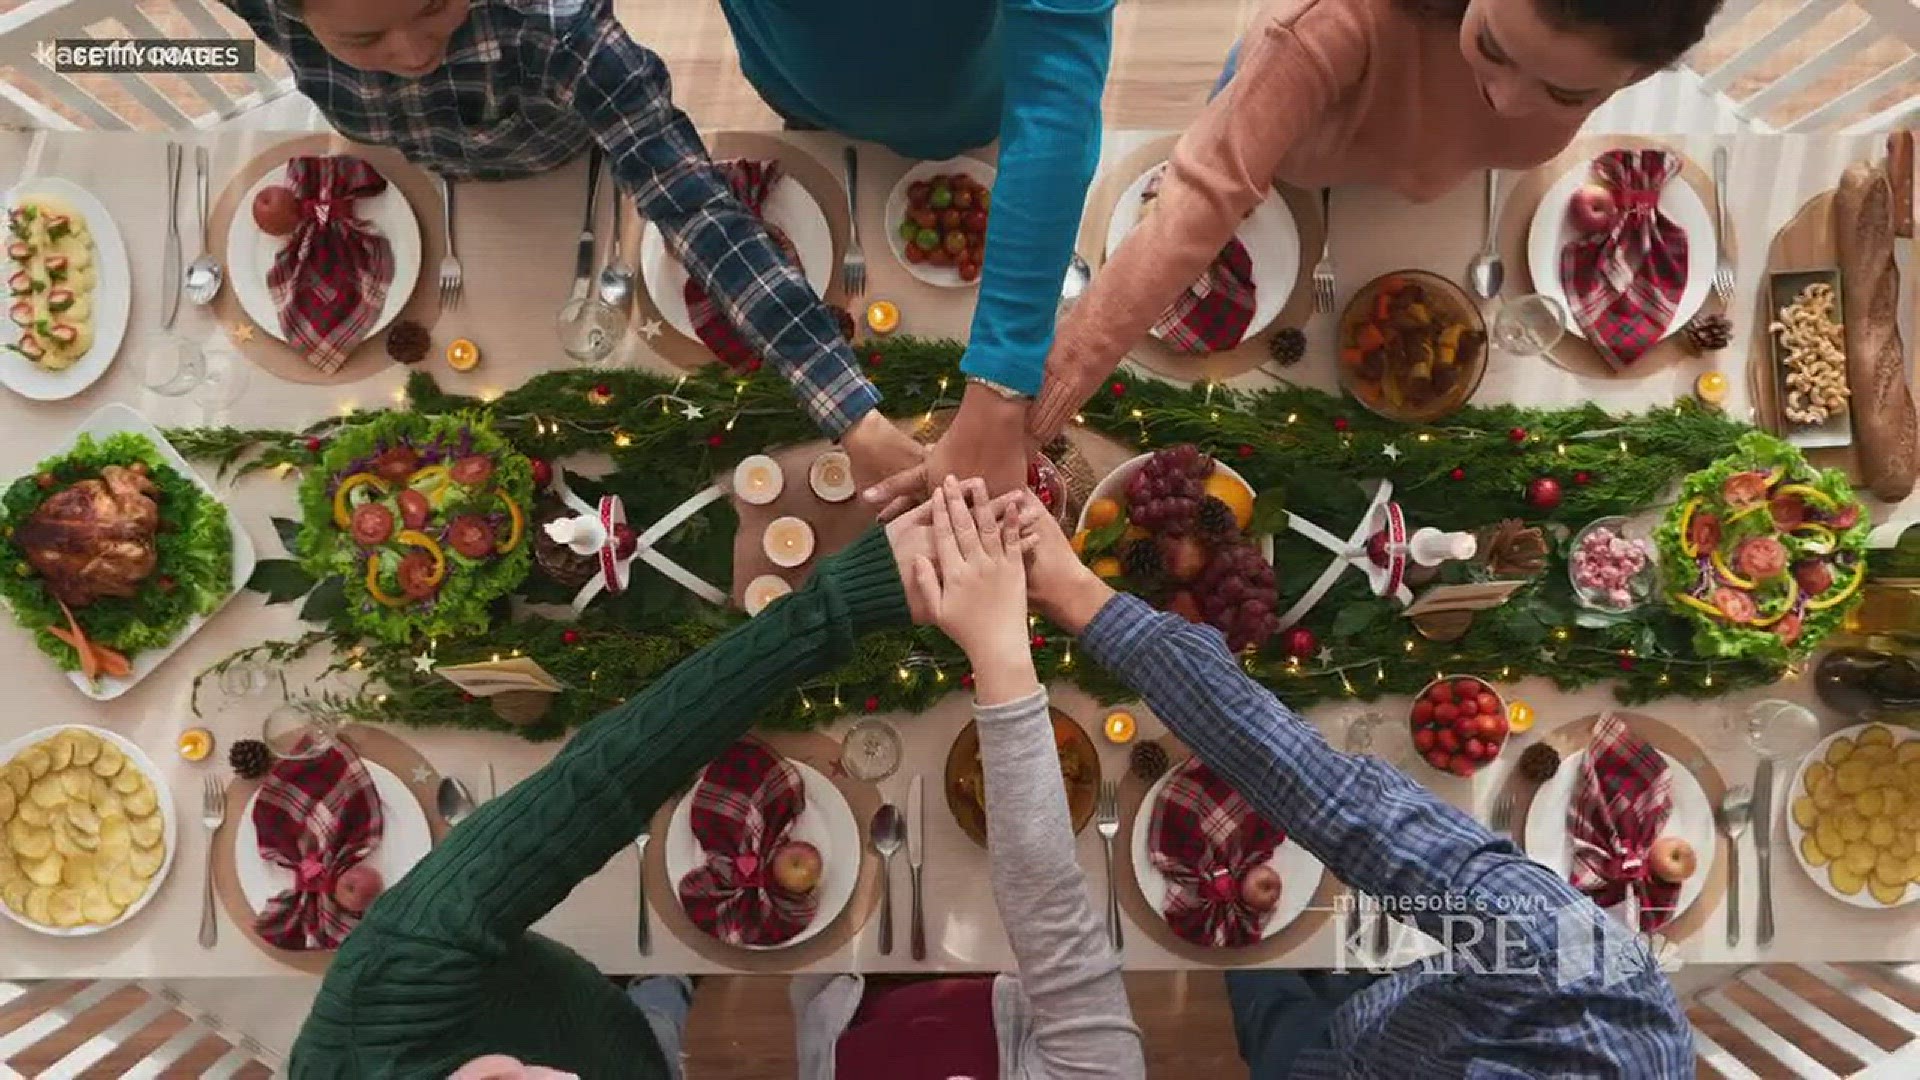 And there's no question the combination of holiday stress, focused family time and passionate perspectives can prove volatile to even the most respectful group gathering. http://kare11.tv/2BnNu94